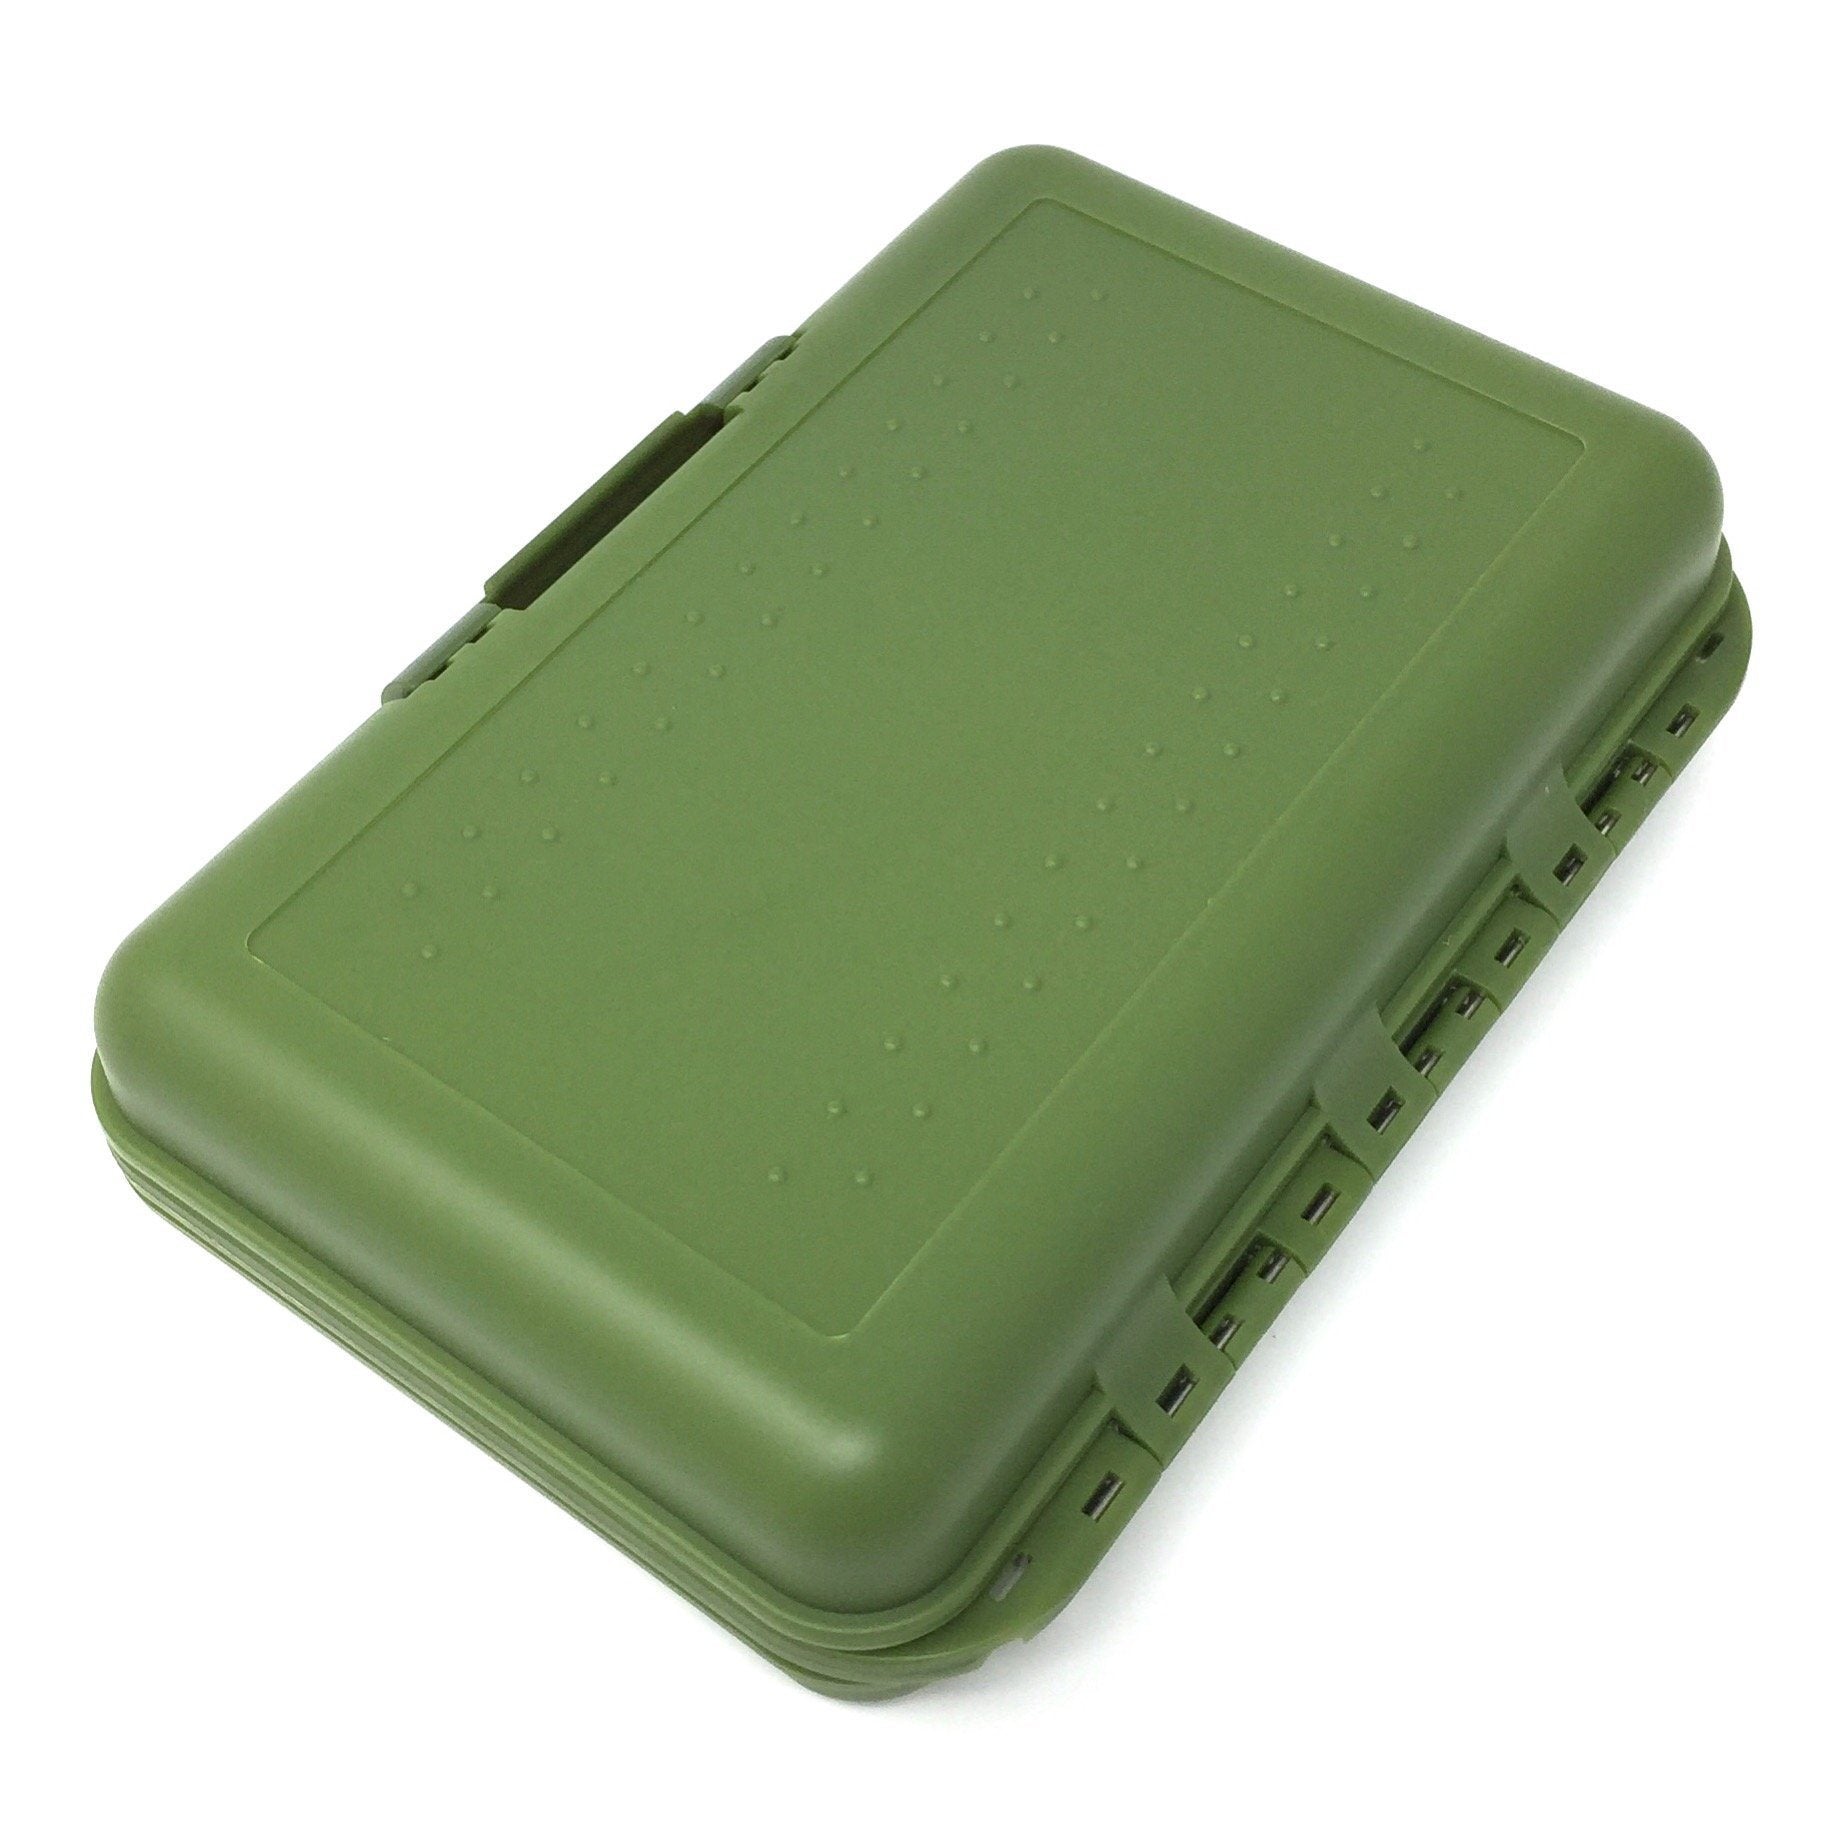 Feeder Creek Fly Fishing Fly Box Waterproof and Durable for Freshwater and Saltwater - Large 4-Sided - 524 Split Foam Fly Slots and Swing Leaf Insert